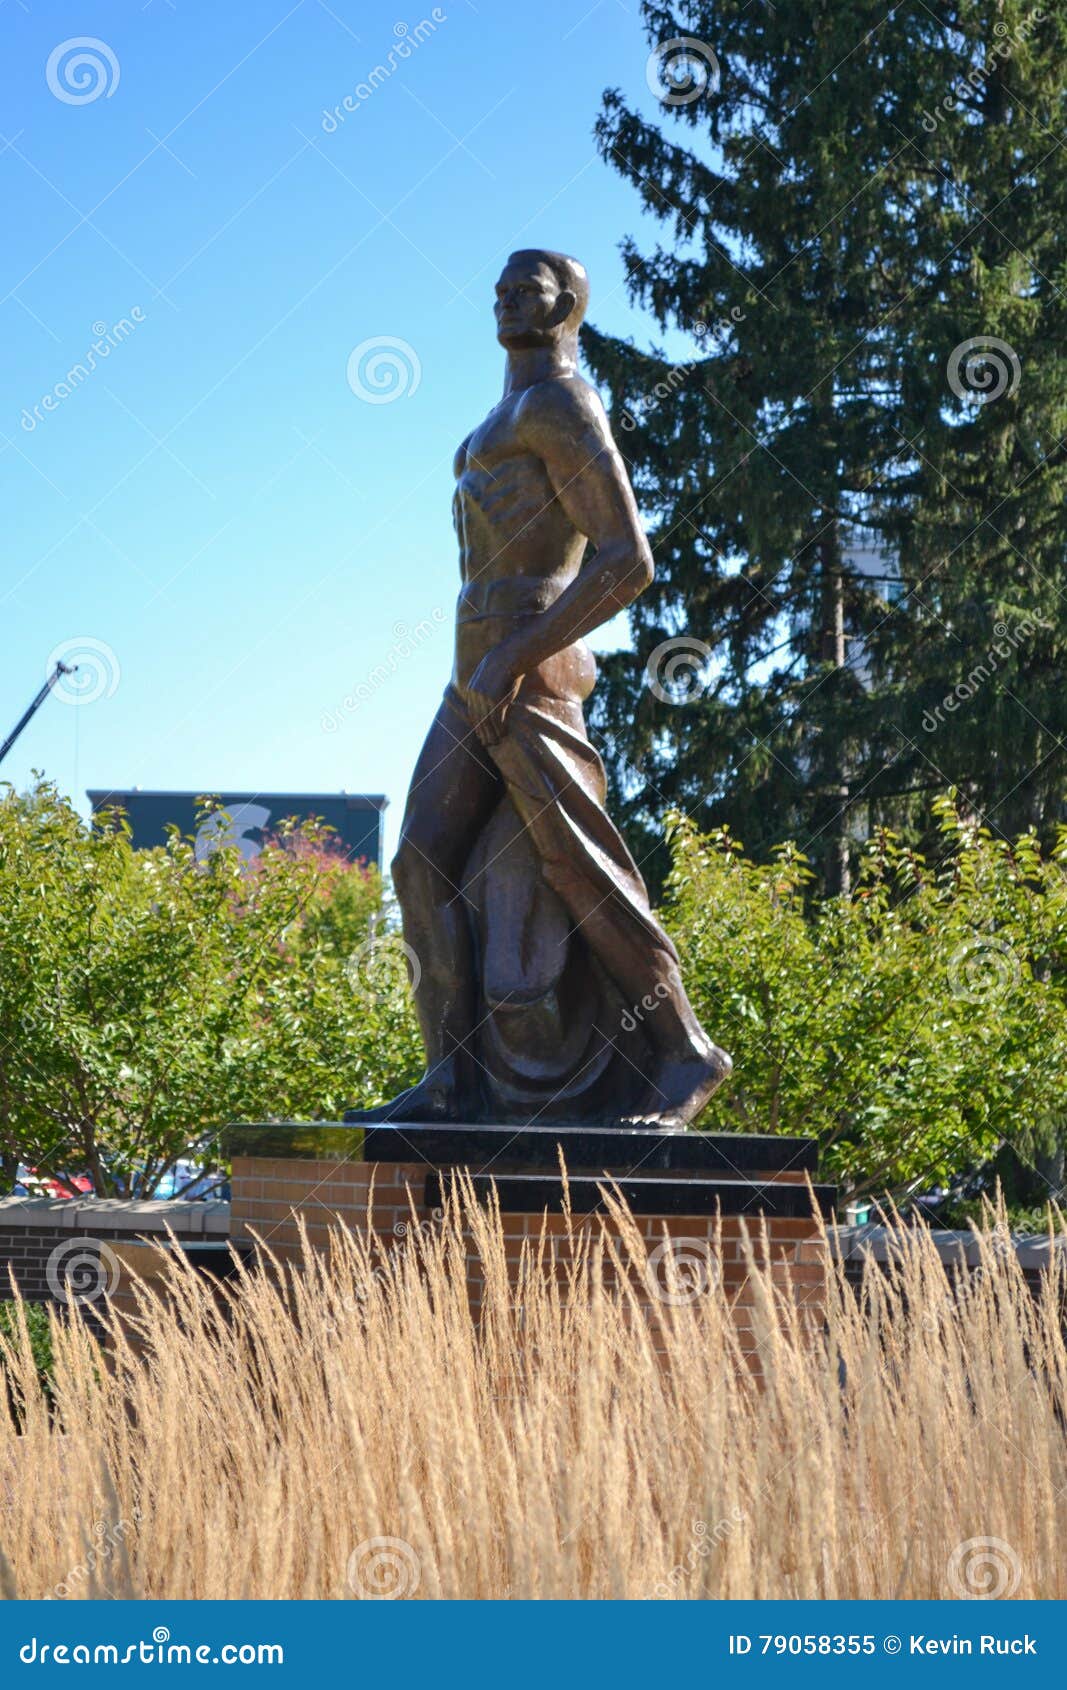 234 Spartan Statue Photos Free Royalty Free Stock Photos From Dreamstime